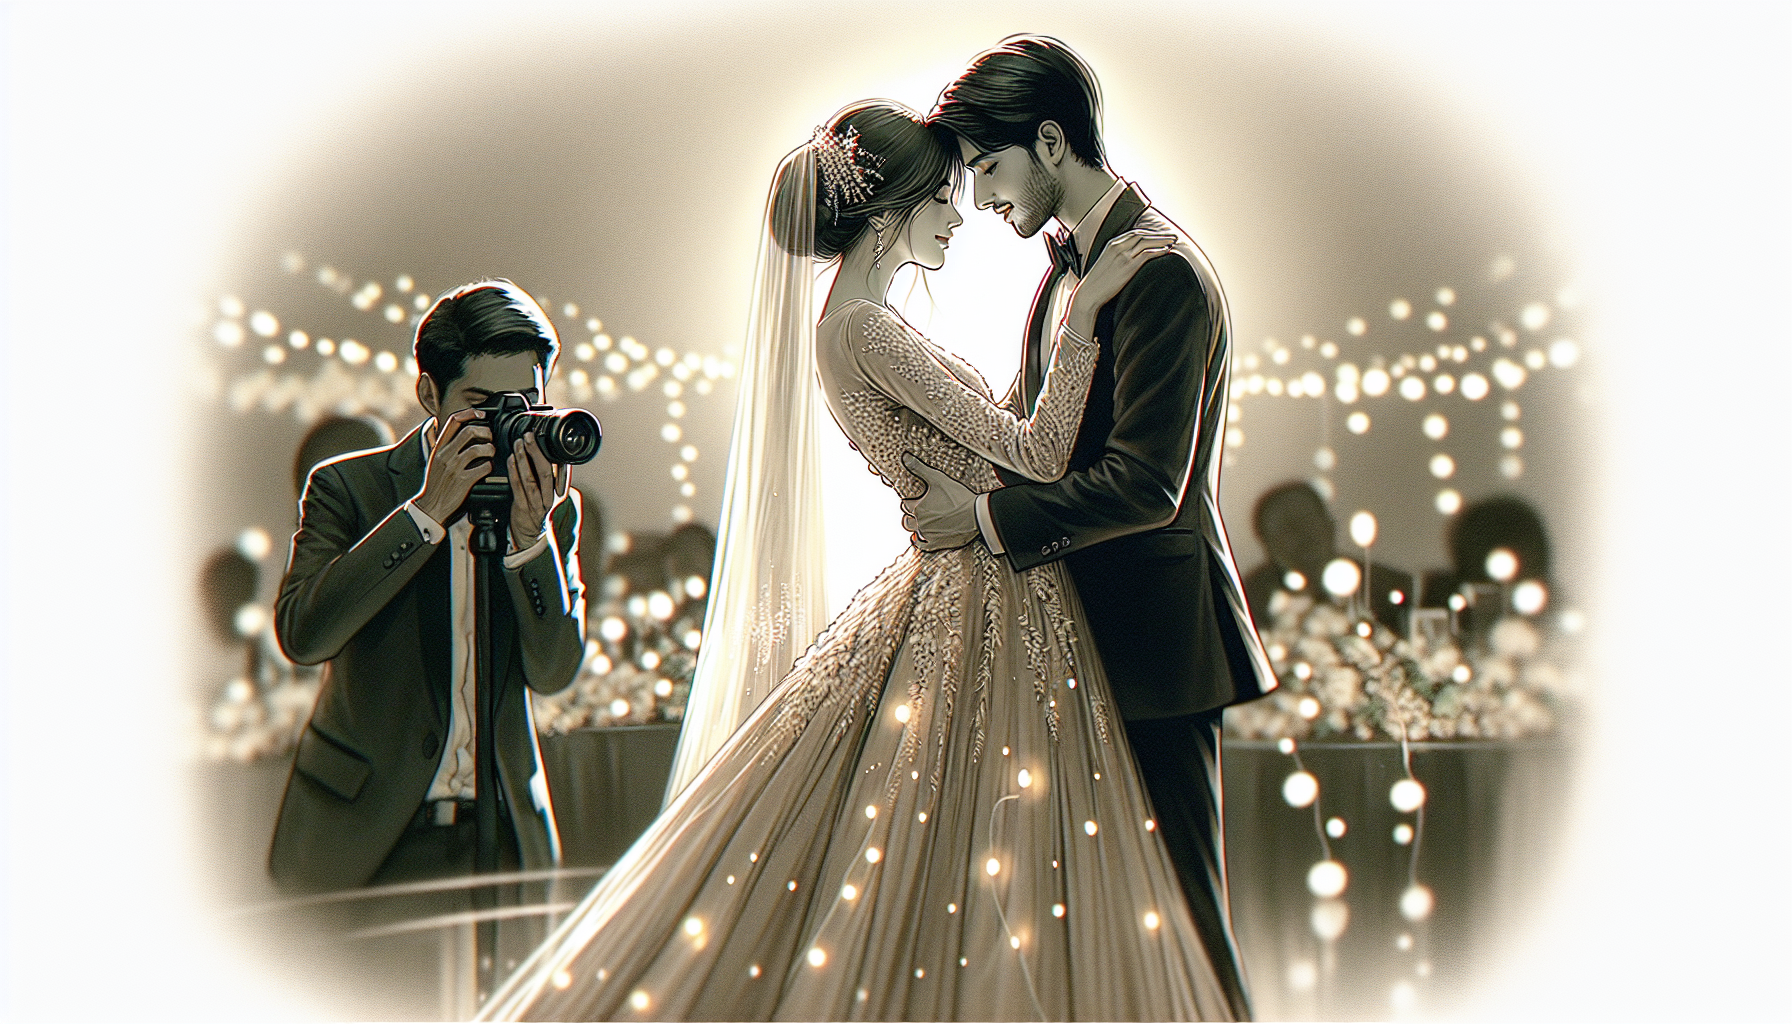 Illustration of a wedding couple with a photographer capturing the moment